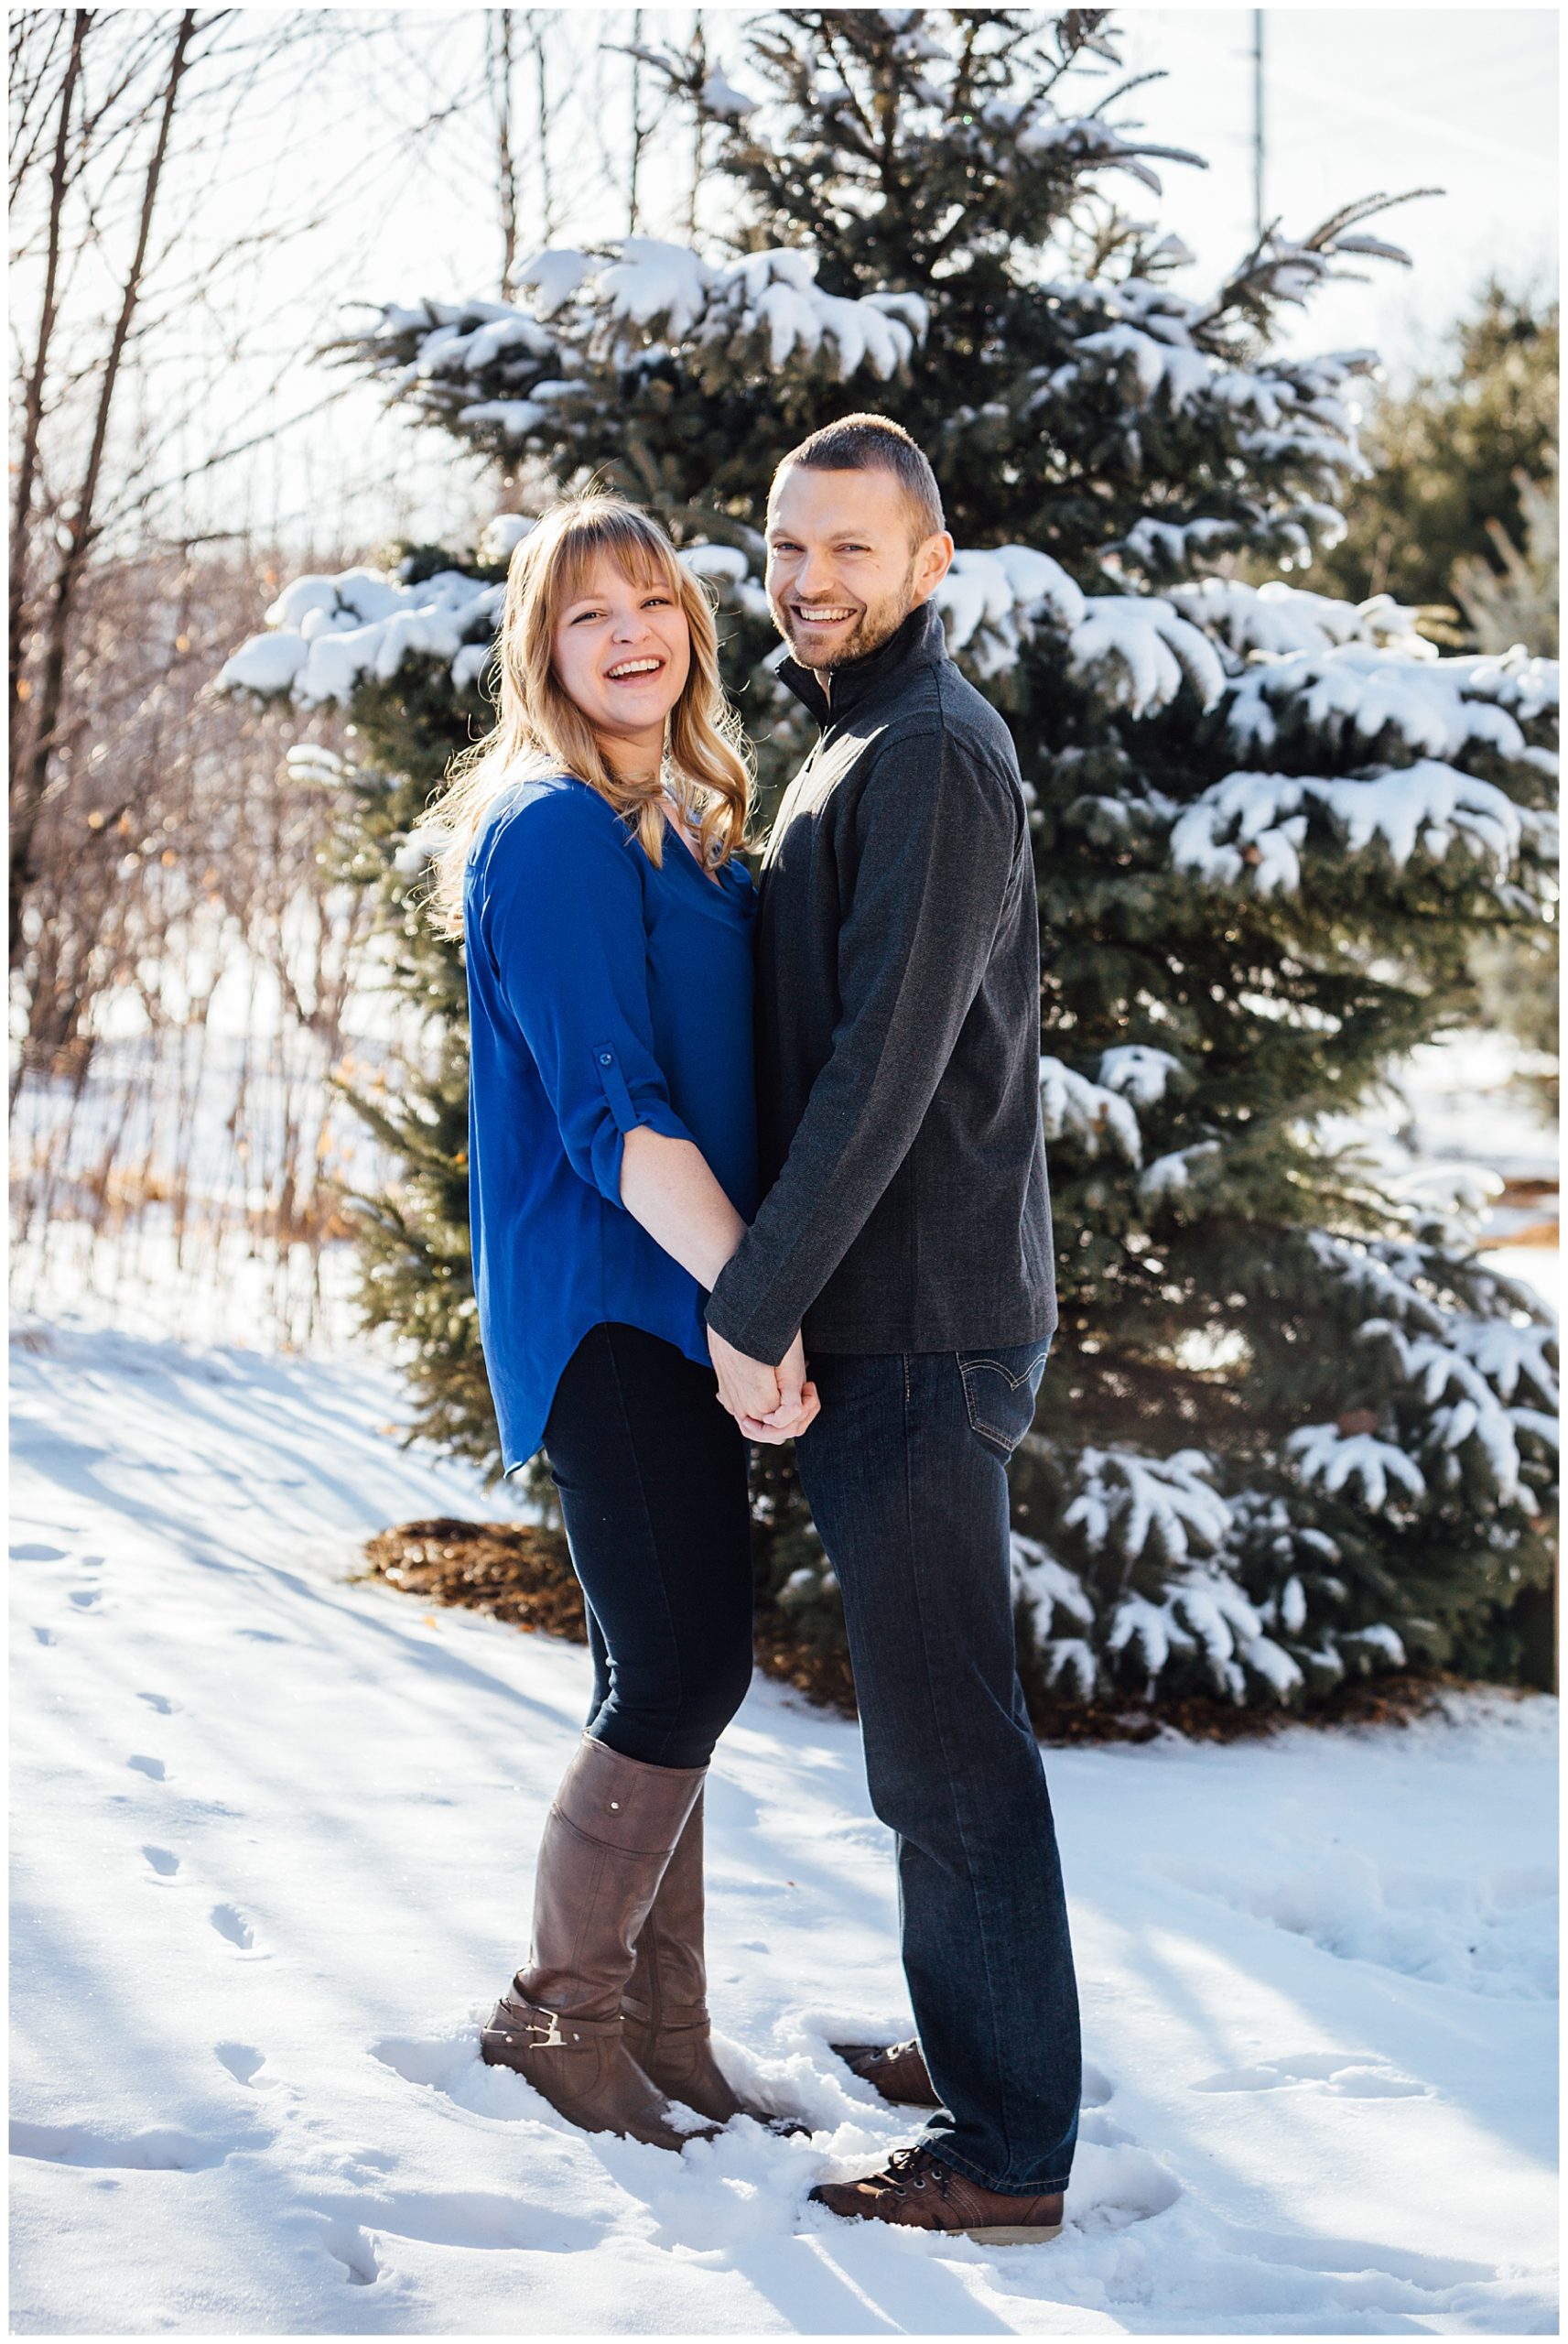 Engagement photo with snow on the ground.